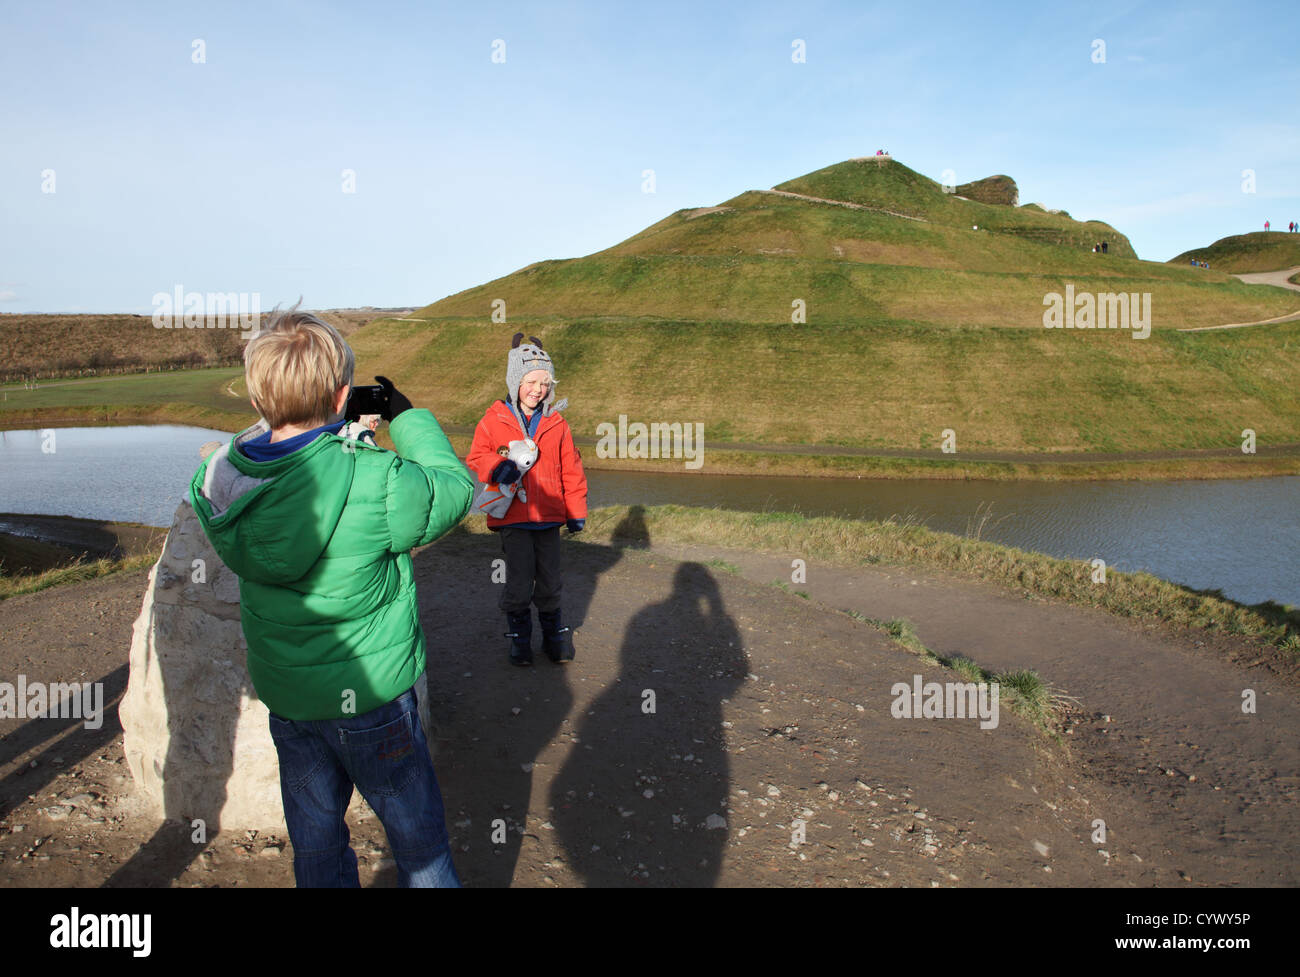 Boy taking photo of young girl at Northumberlandia public art sculpture north east England UK Stock Photo